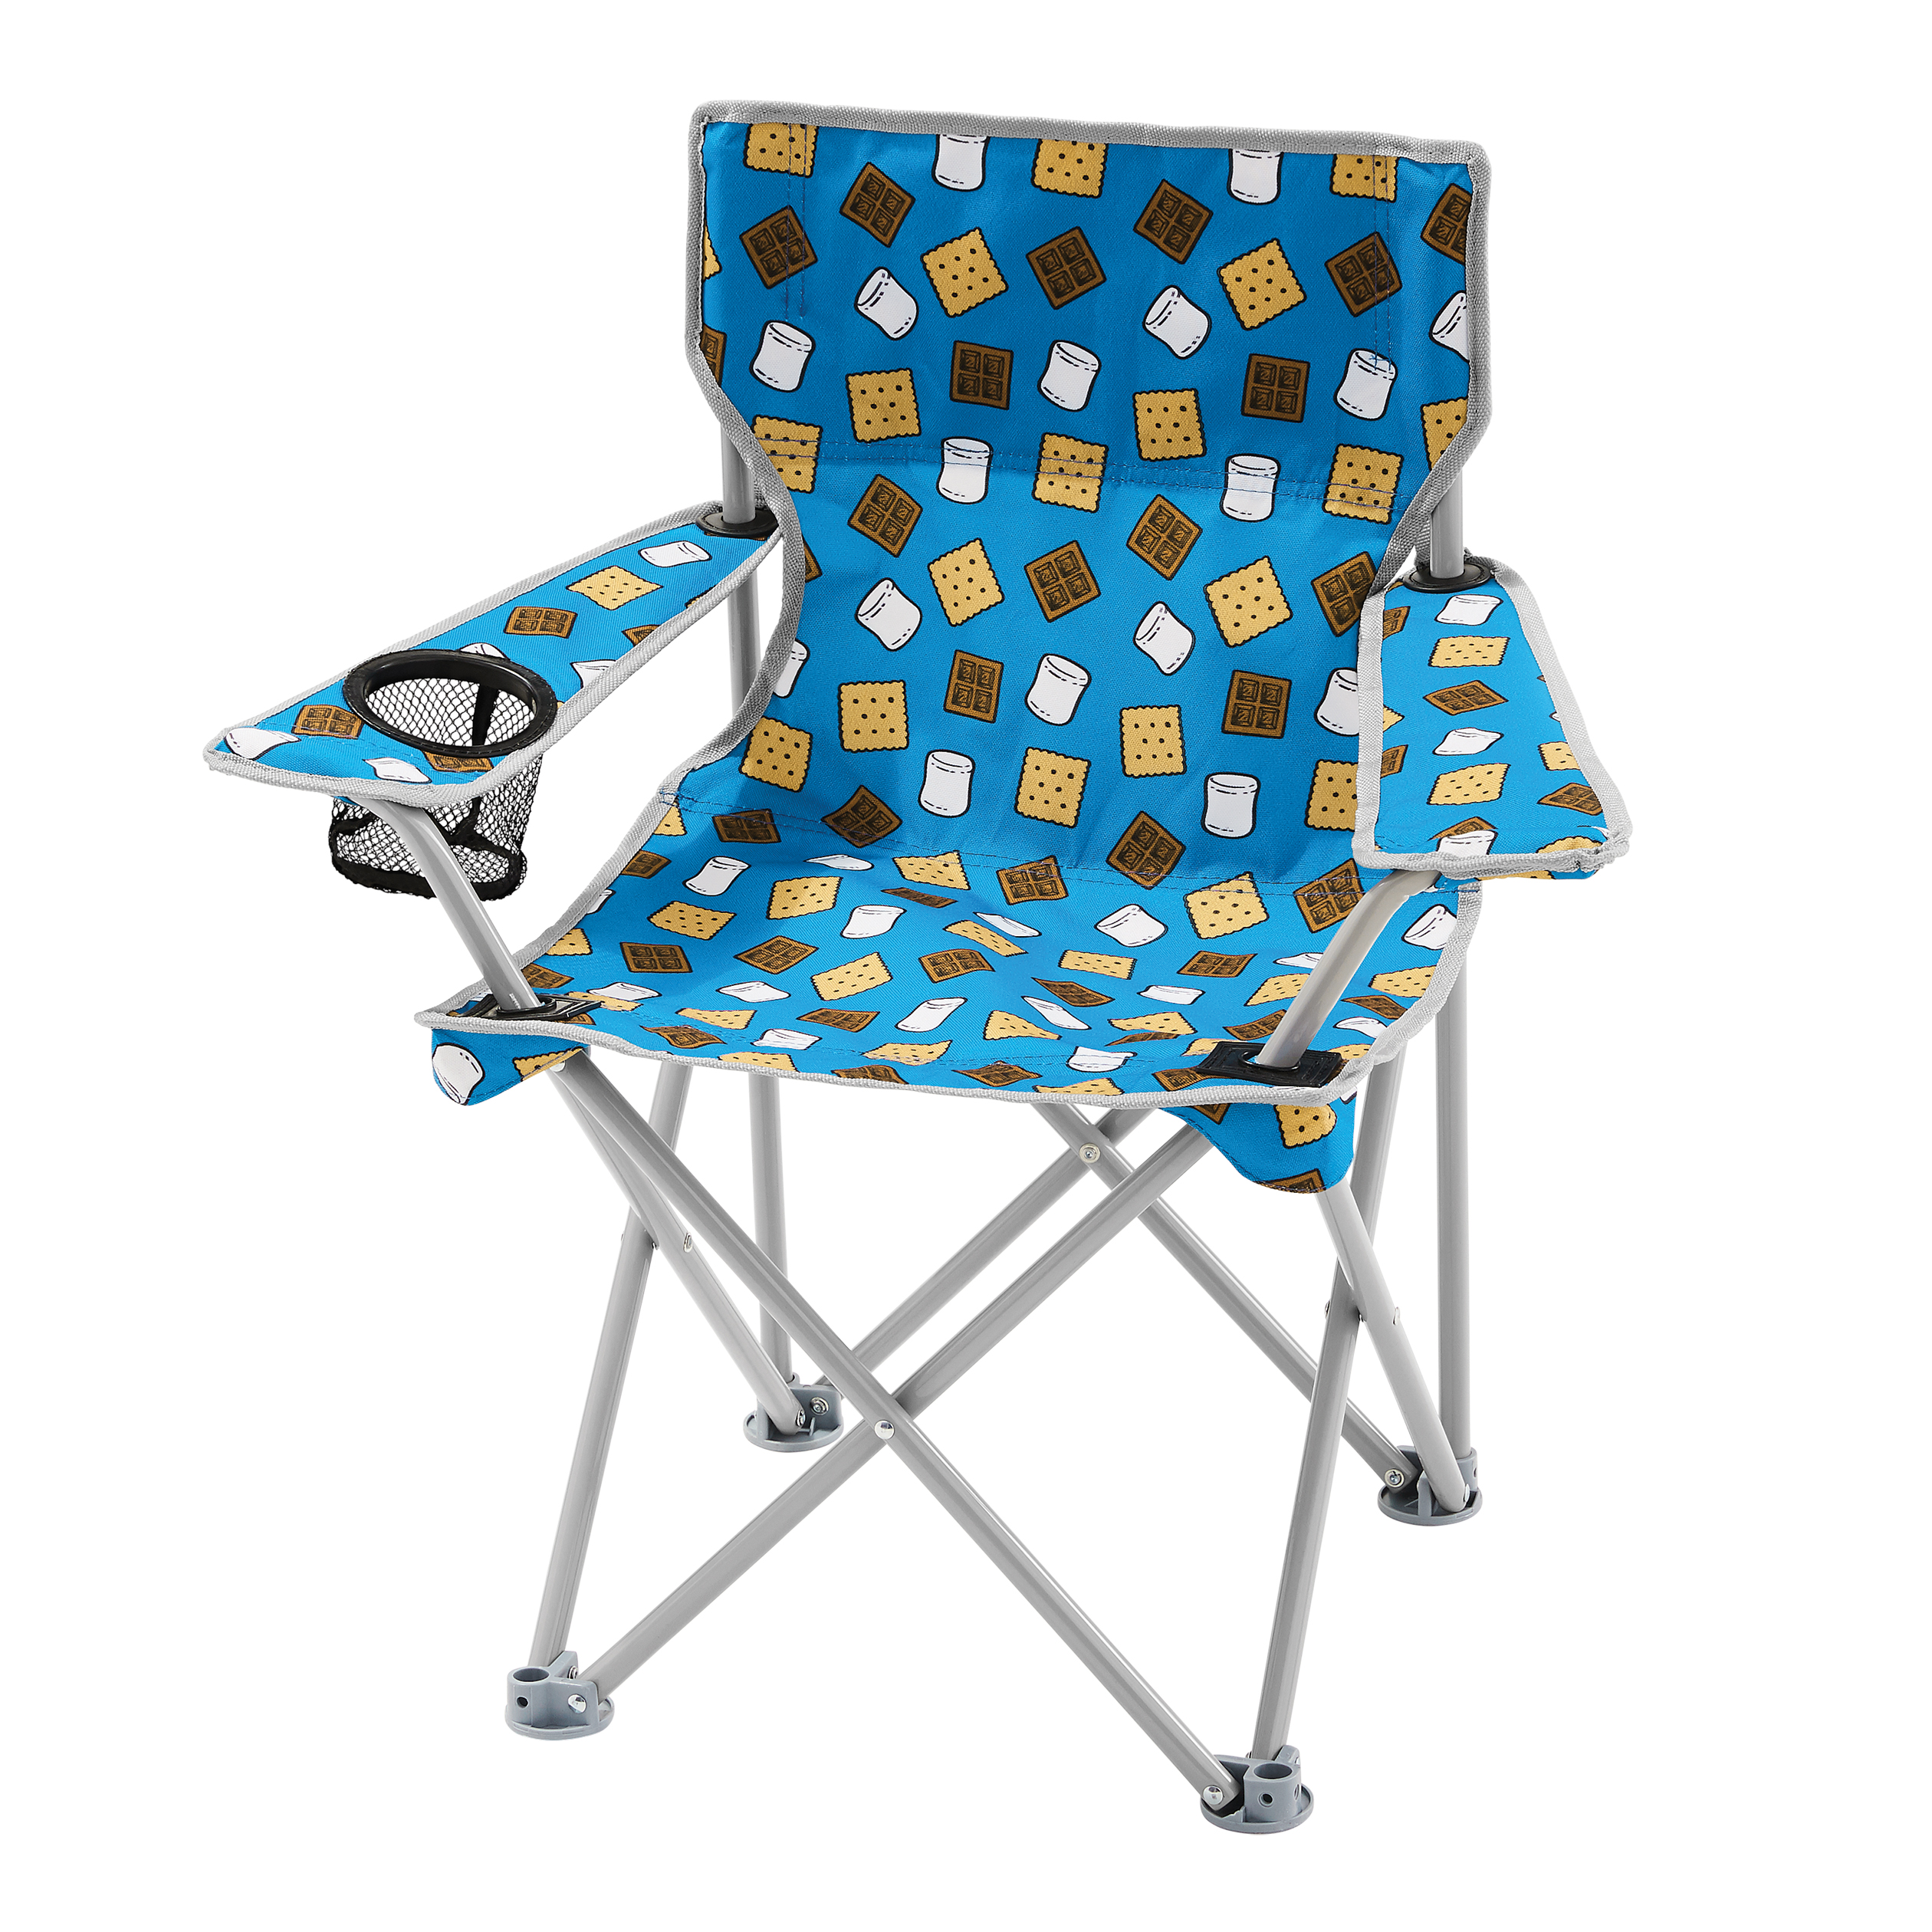 Ozark Trail Kids Camping Chair (Smores) Only $2.50!